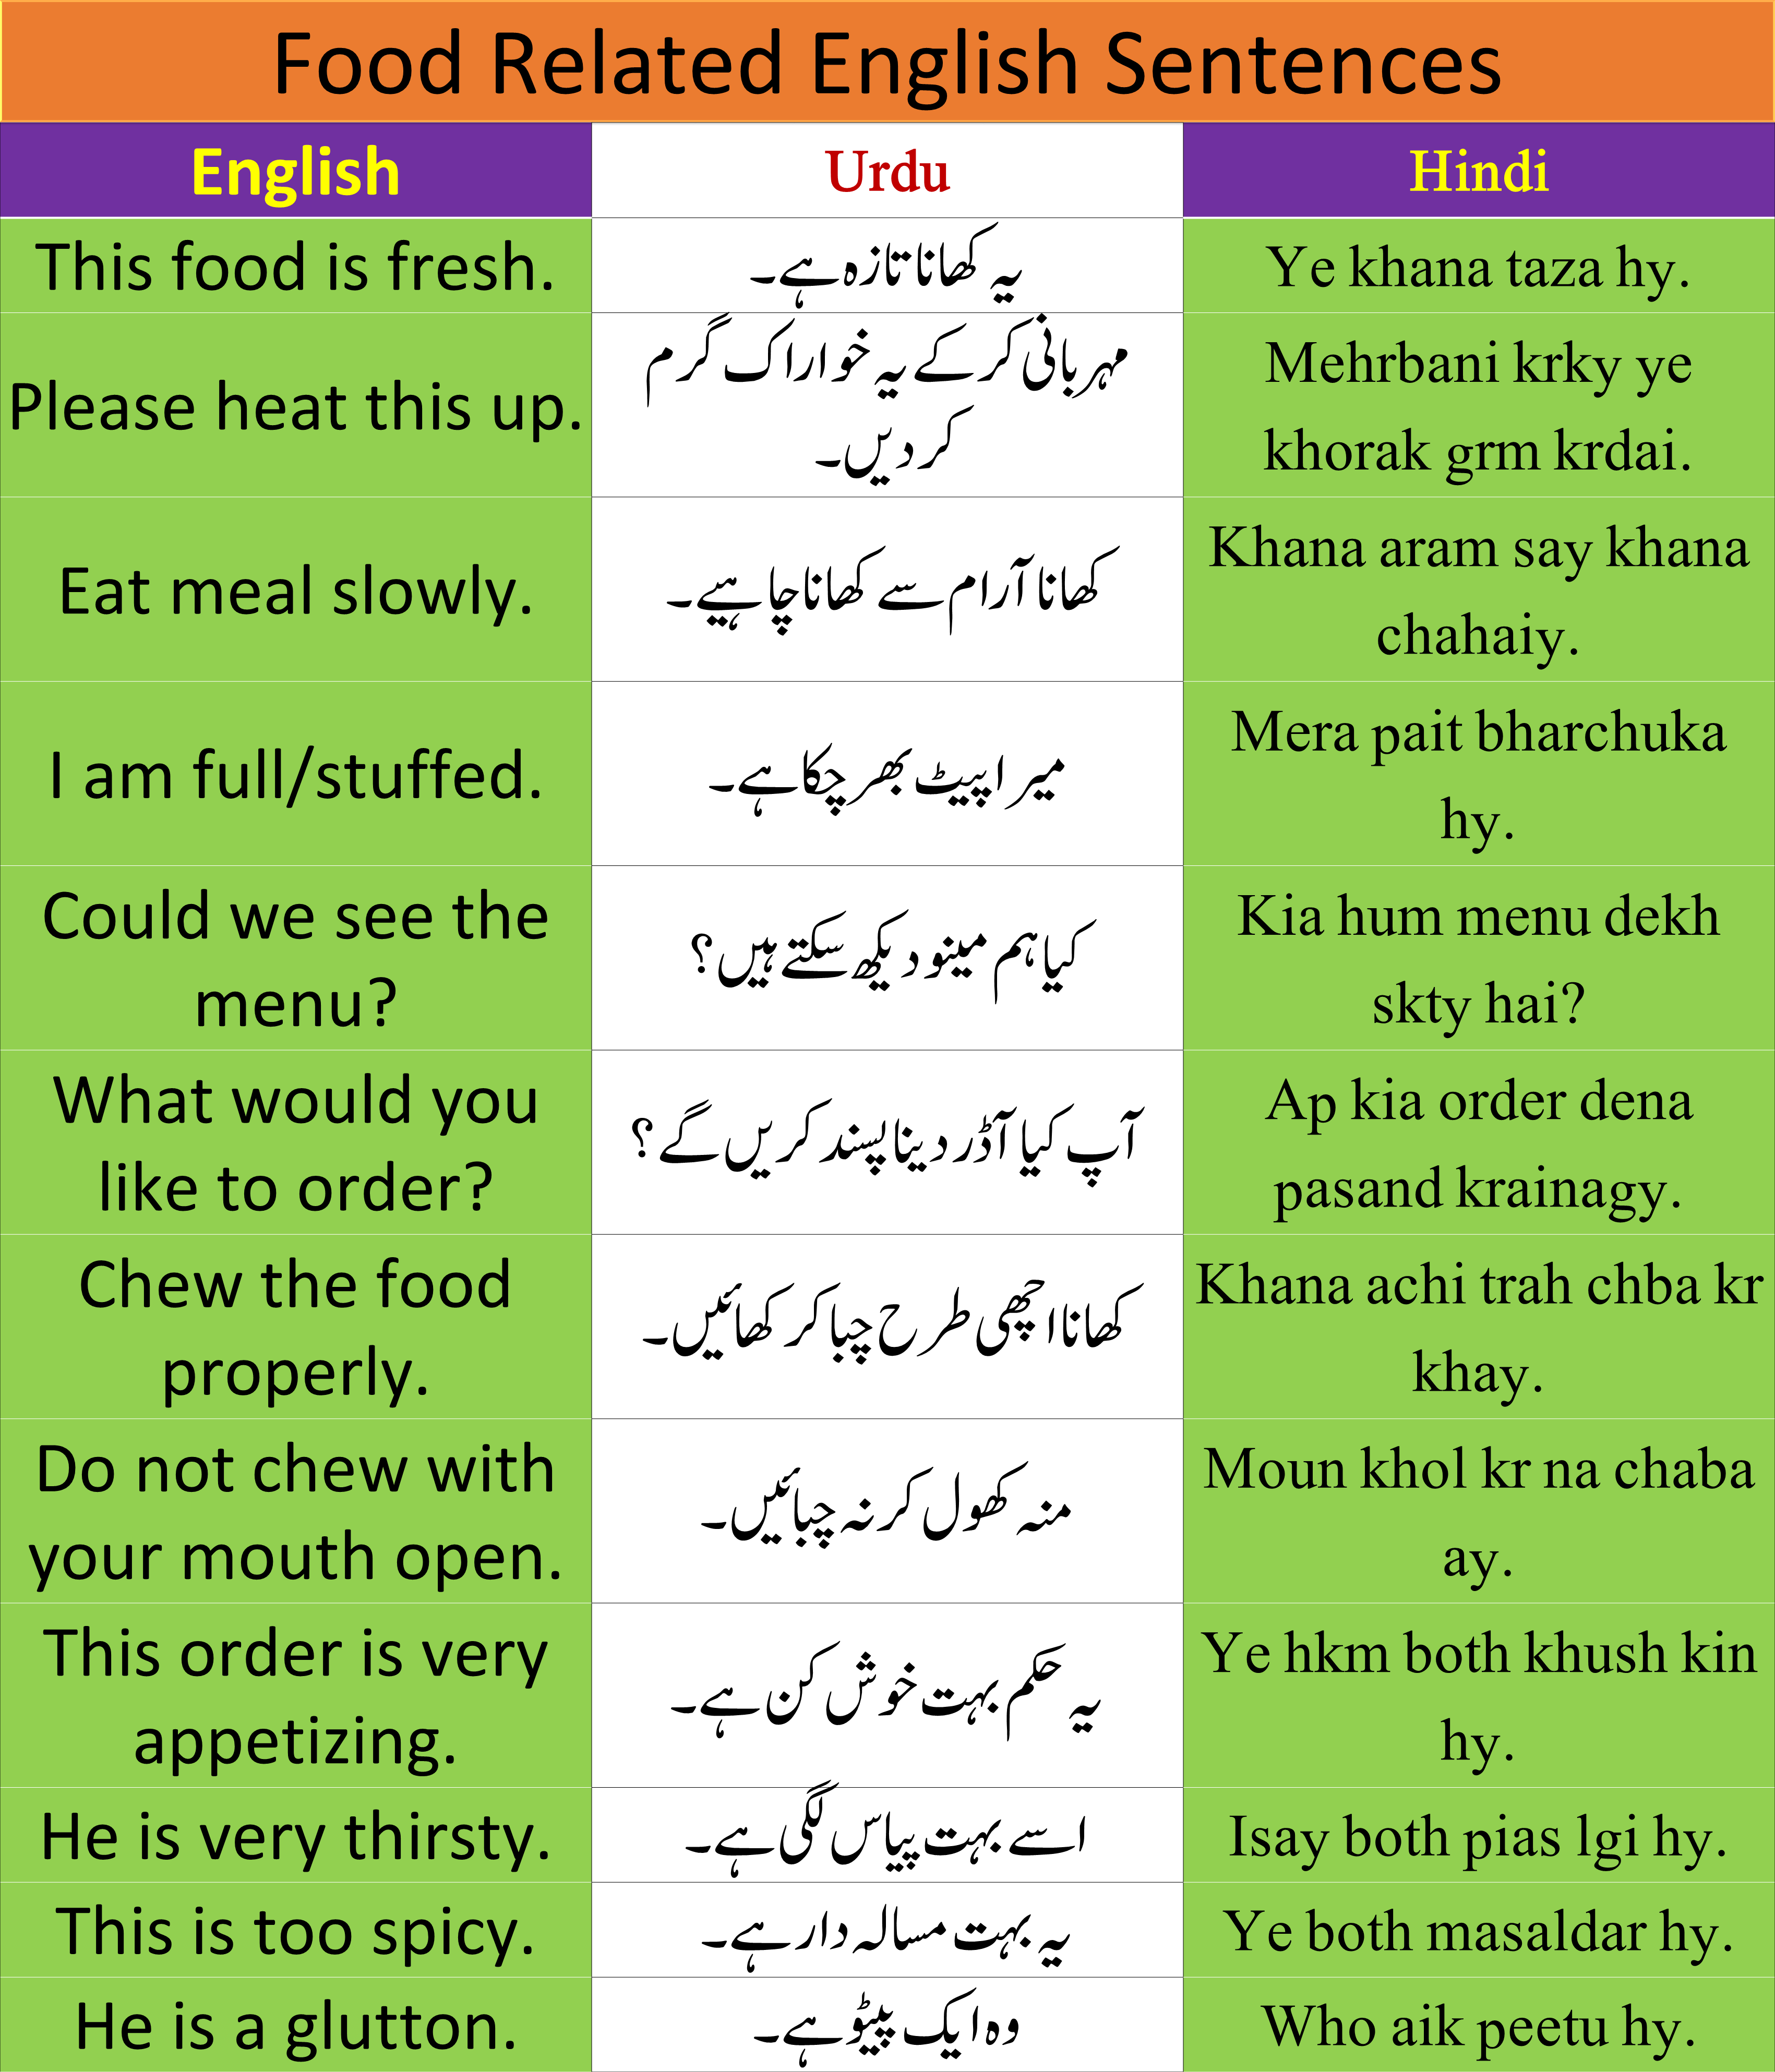 Sentences Related to Food